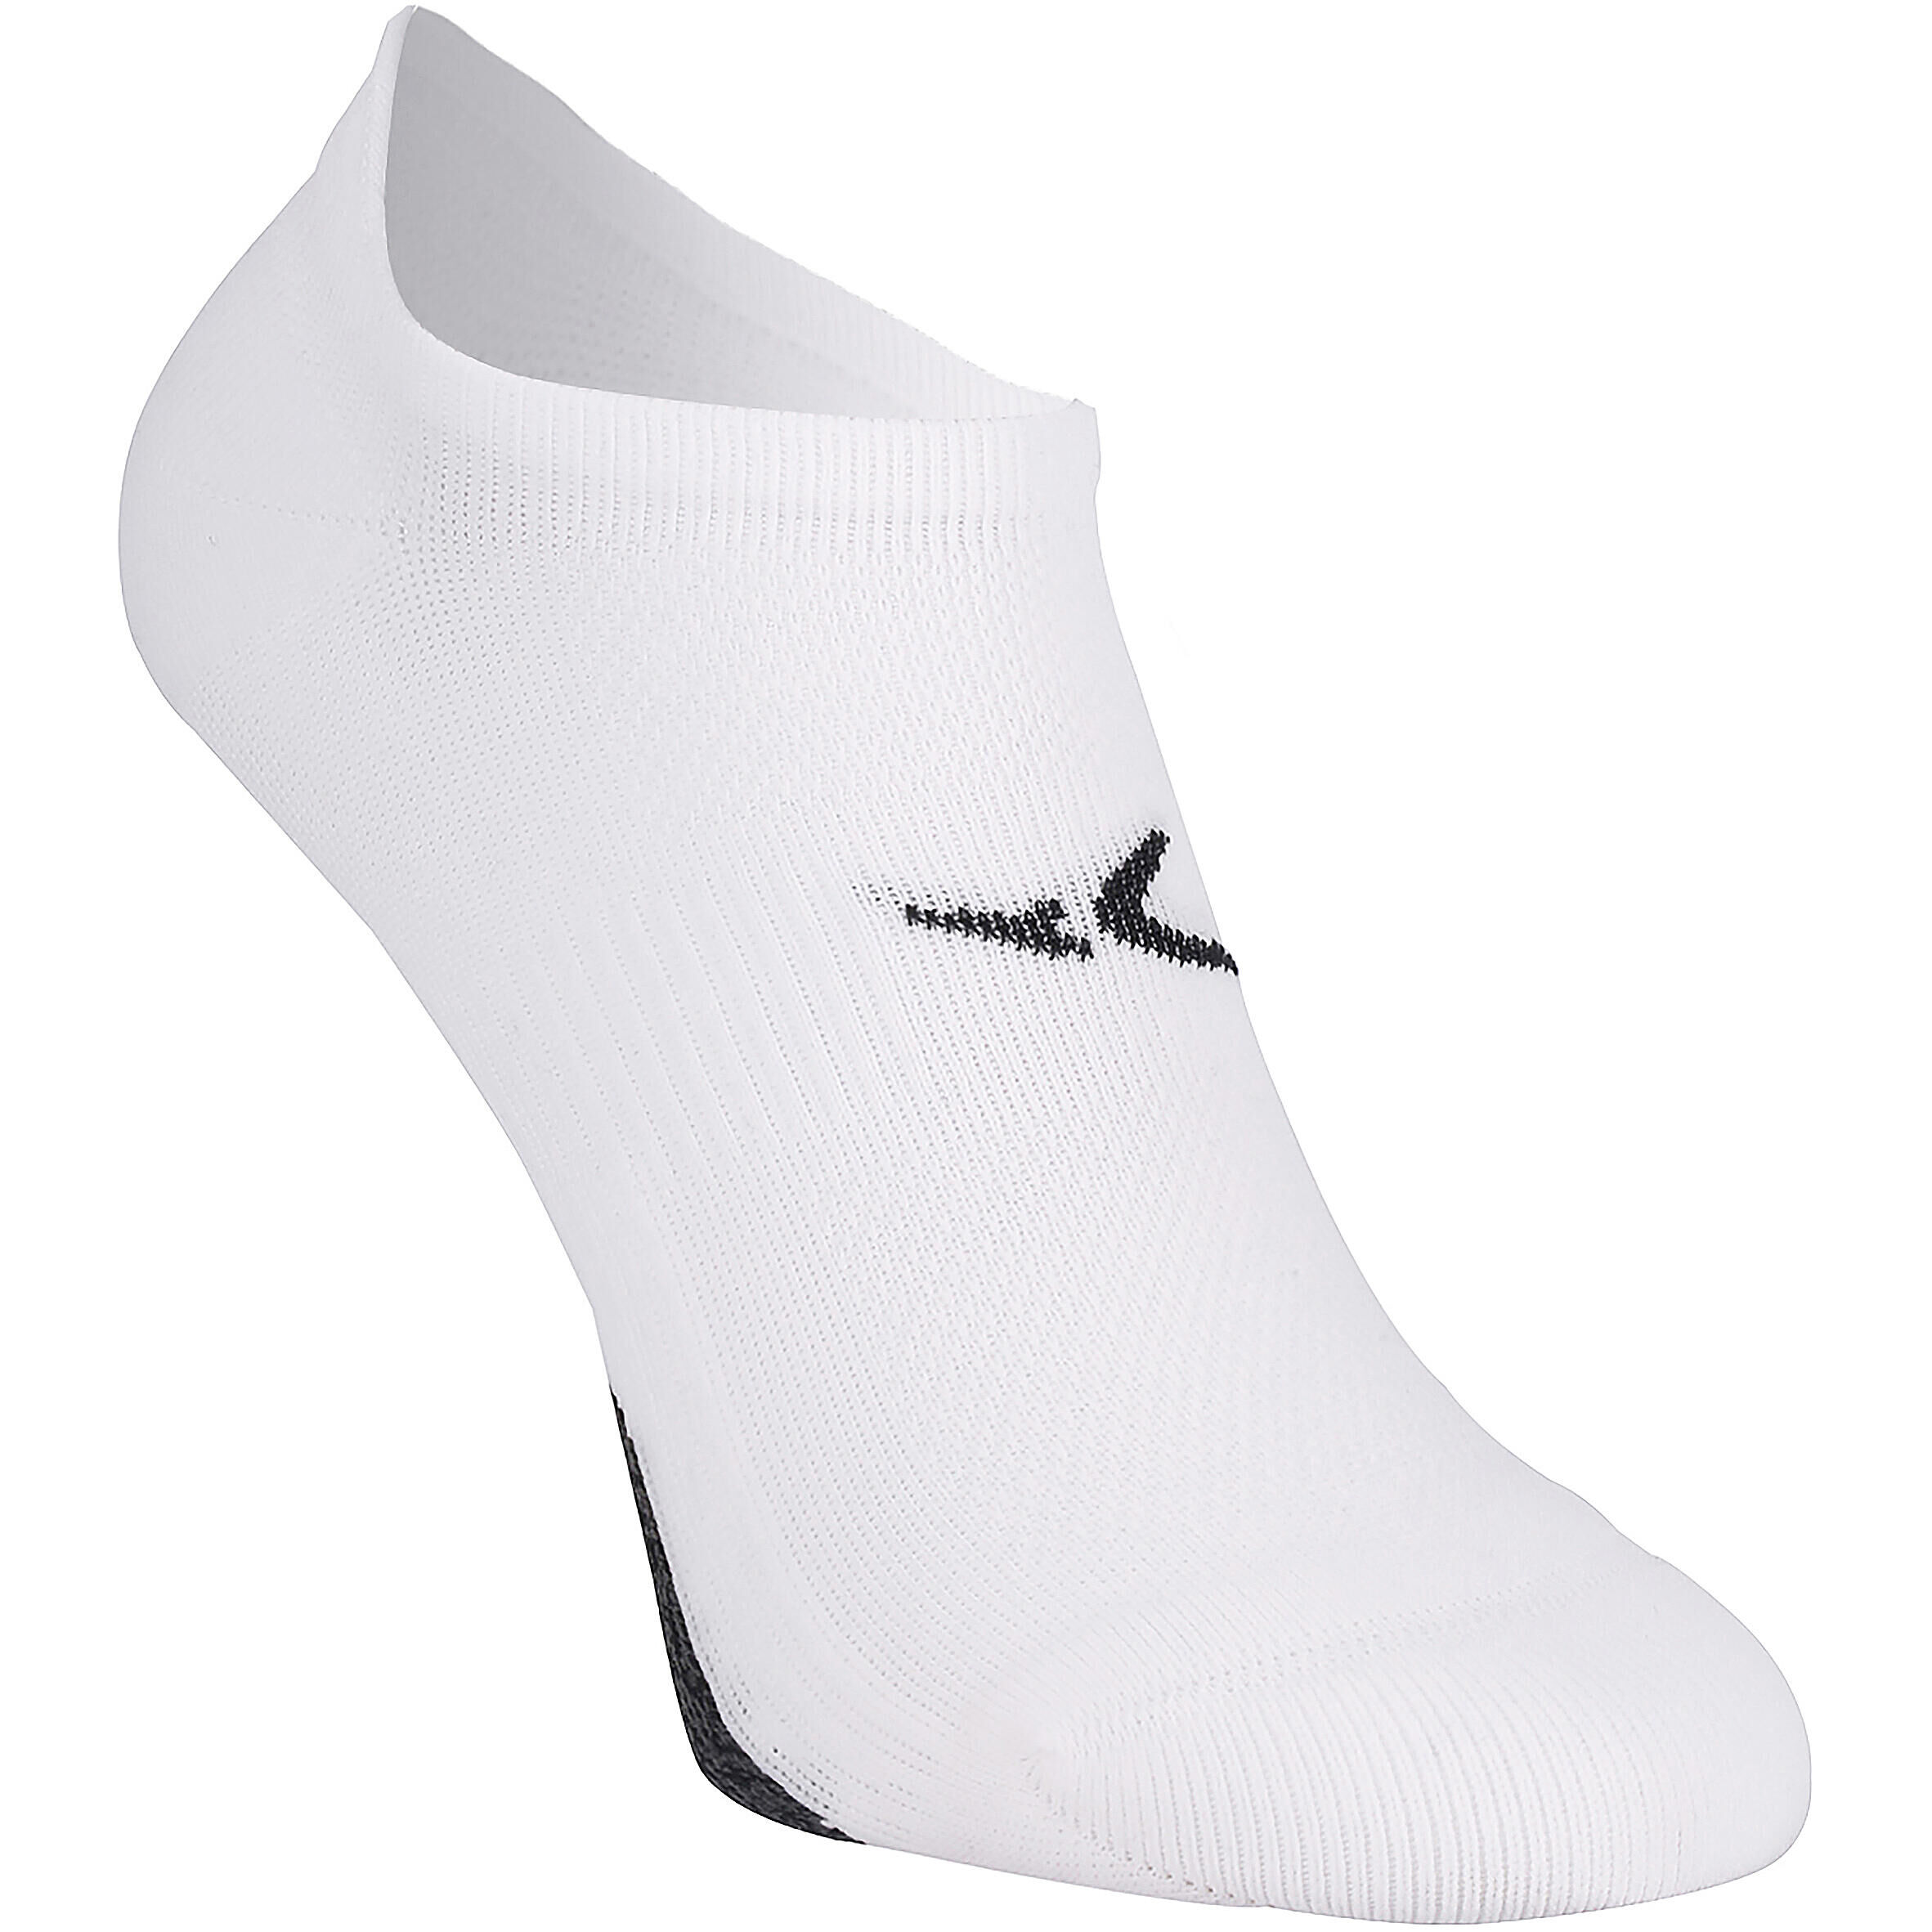 DOMYOS Invisible Fitness Cardio Training Socks Twin-Pack - White